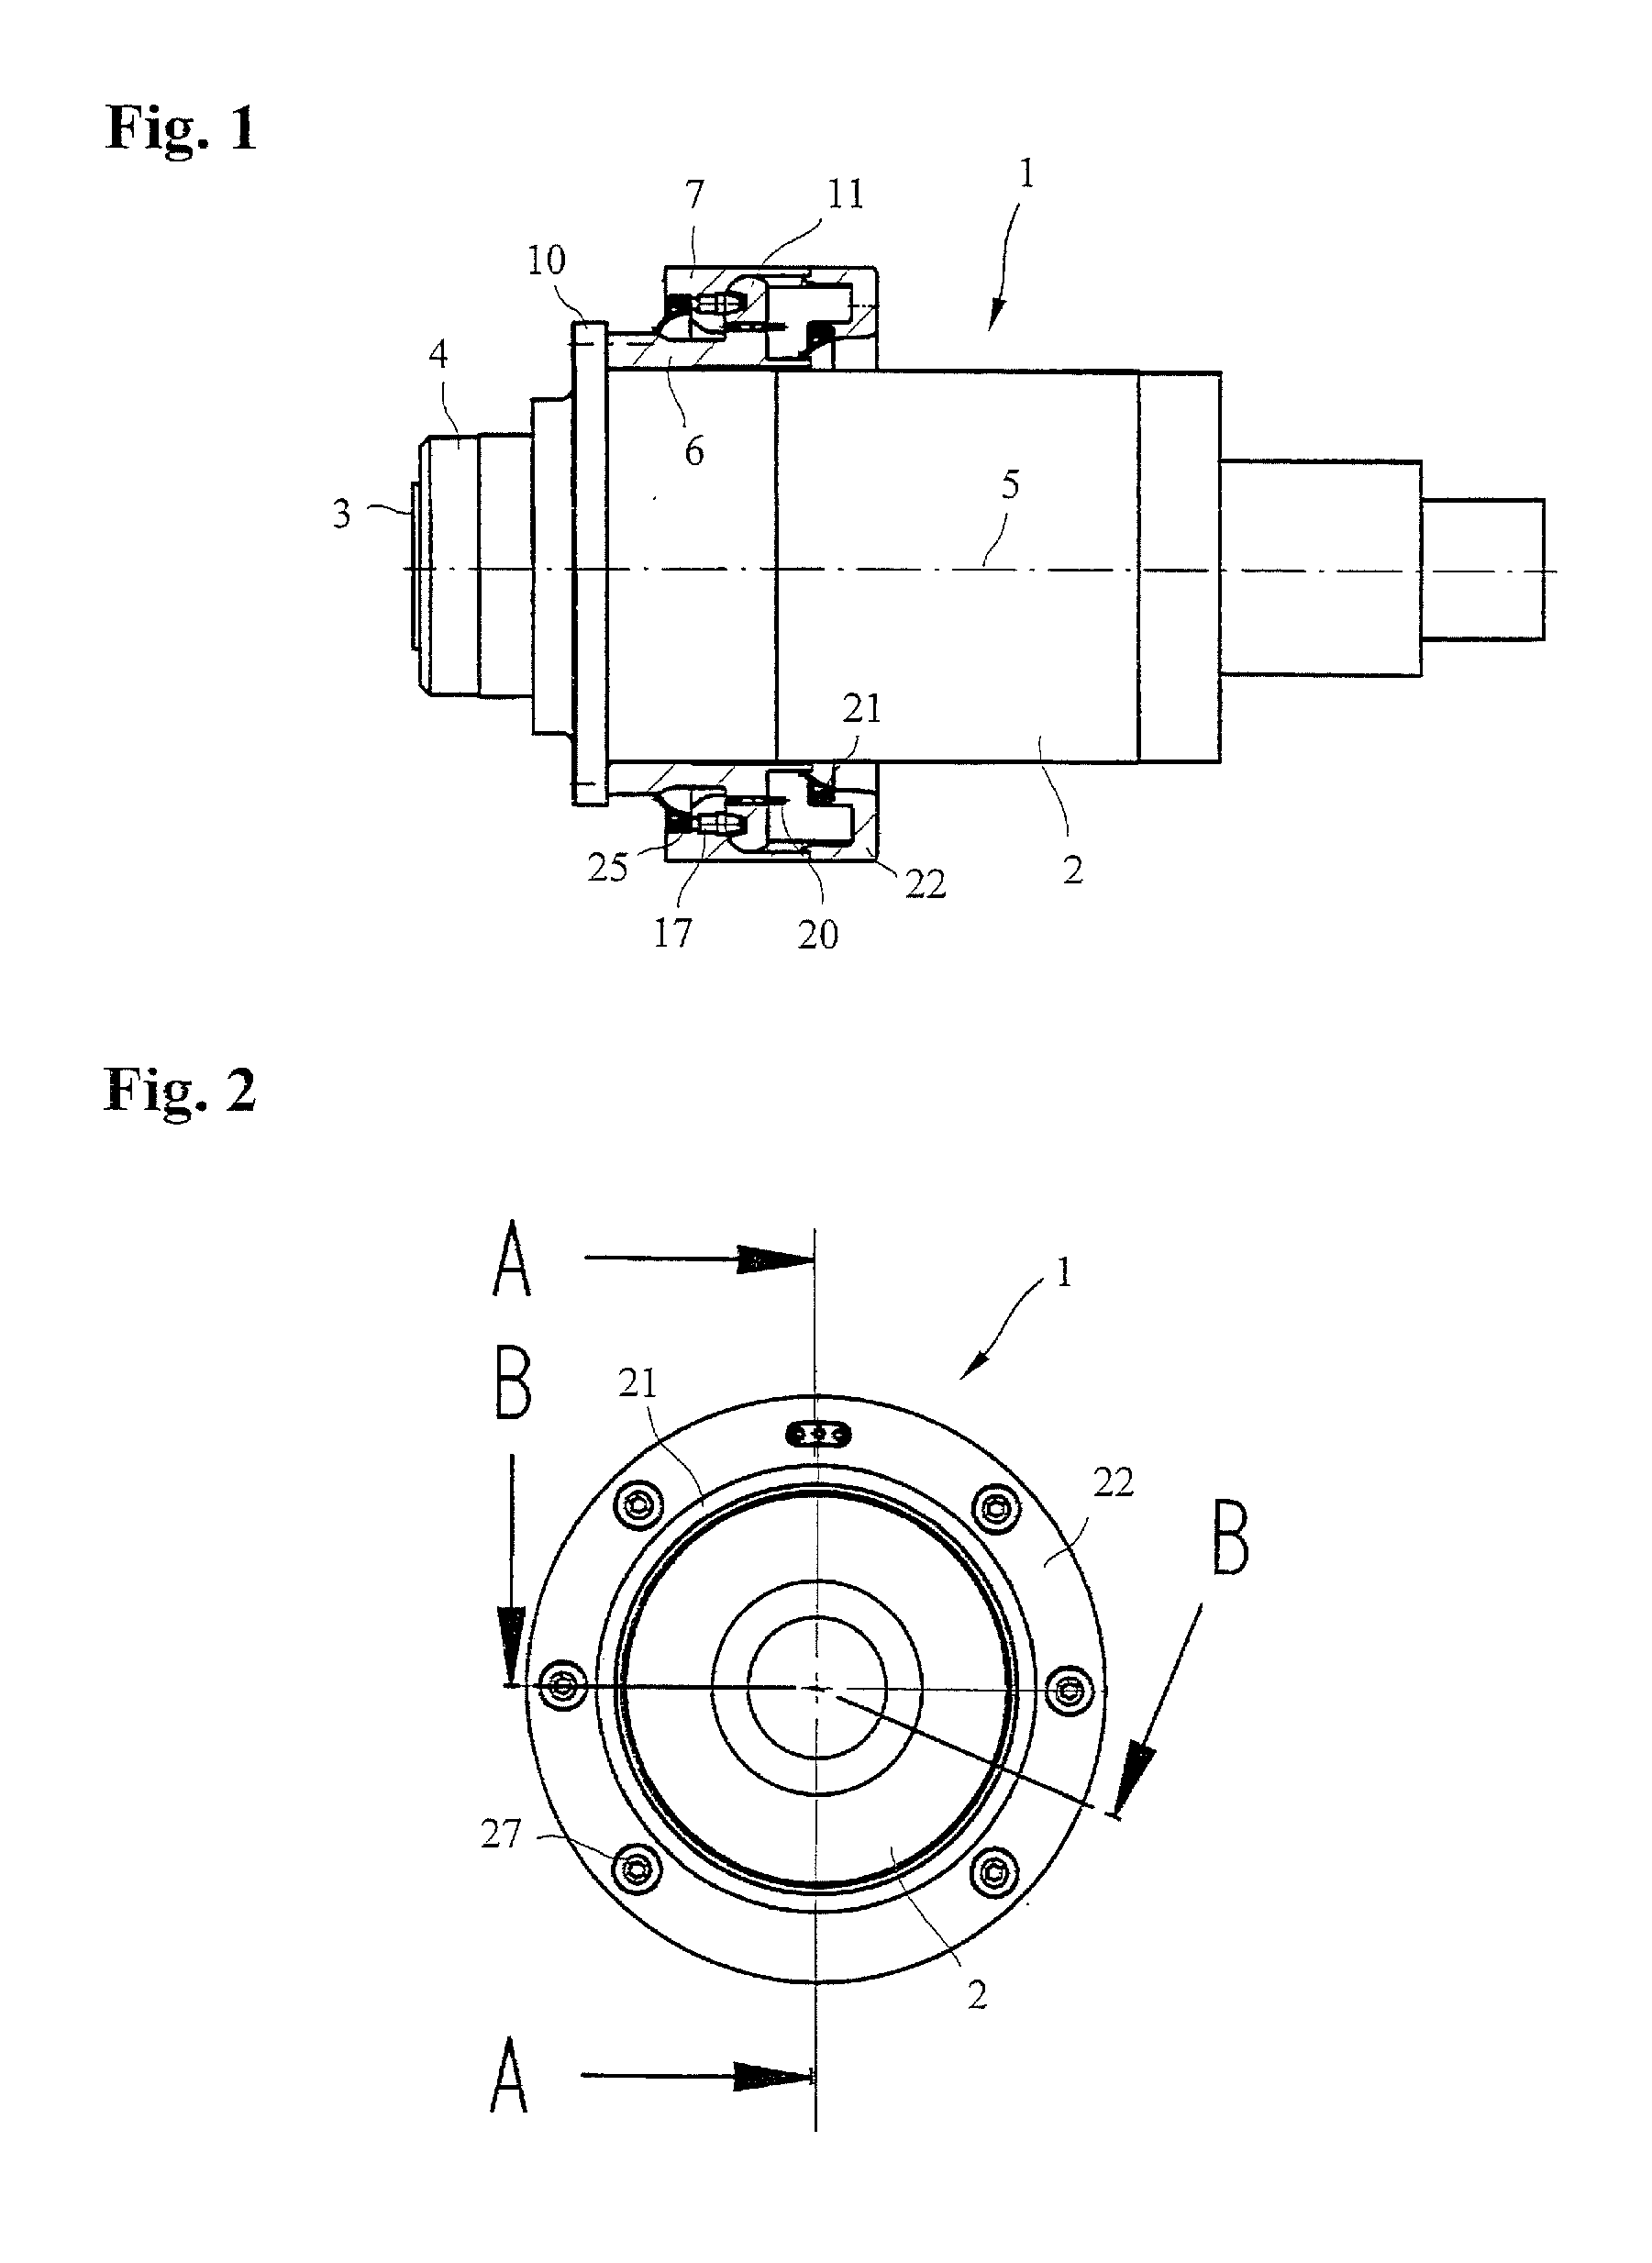 Device to hold a work spindle